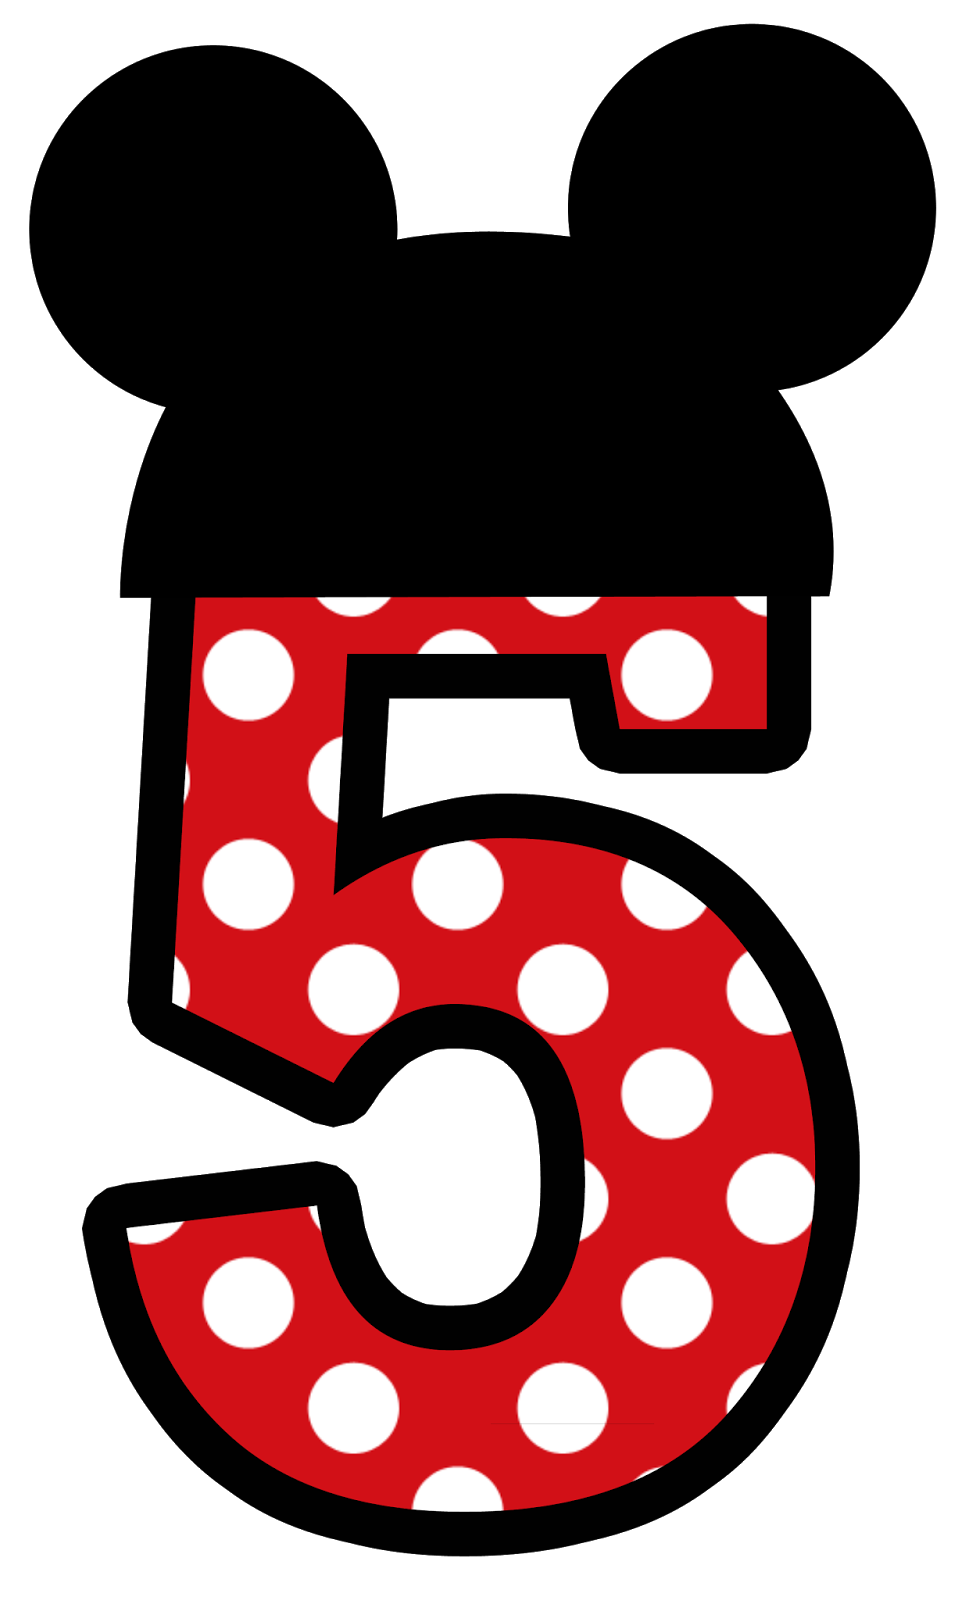 Mickey Mouse Numbers SVG